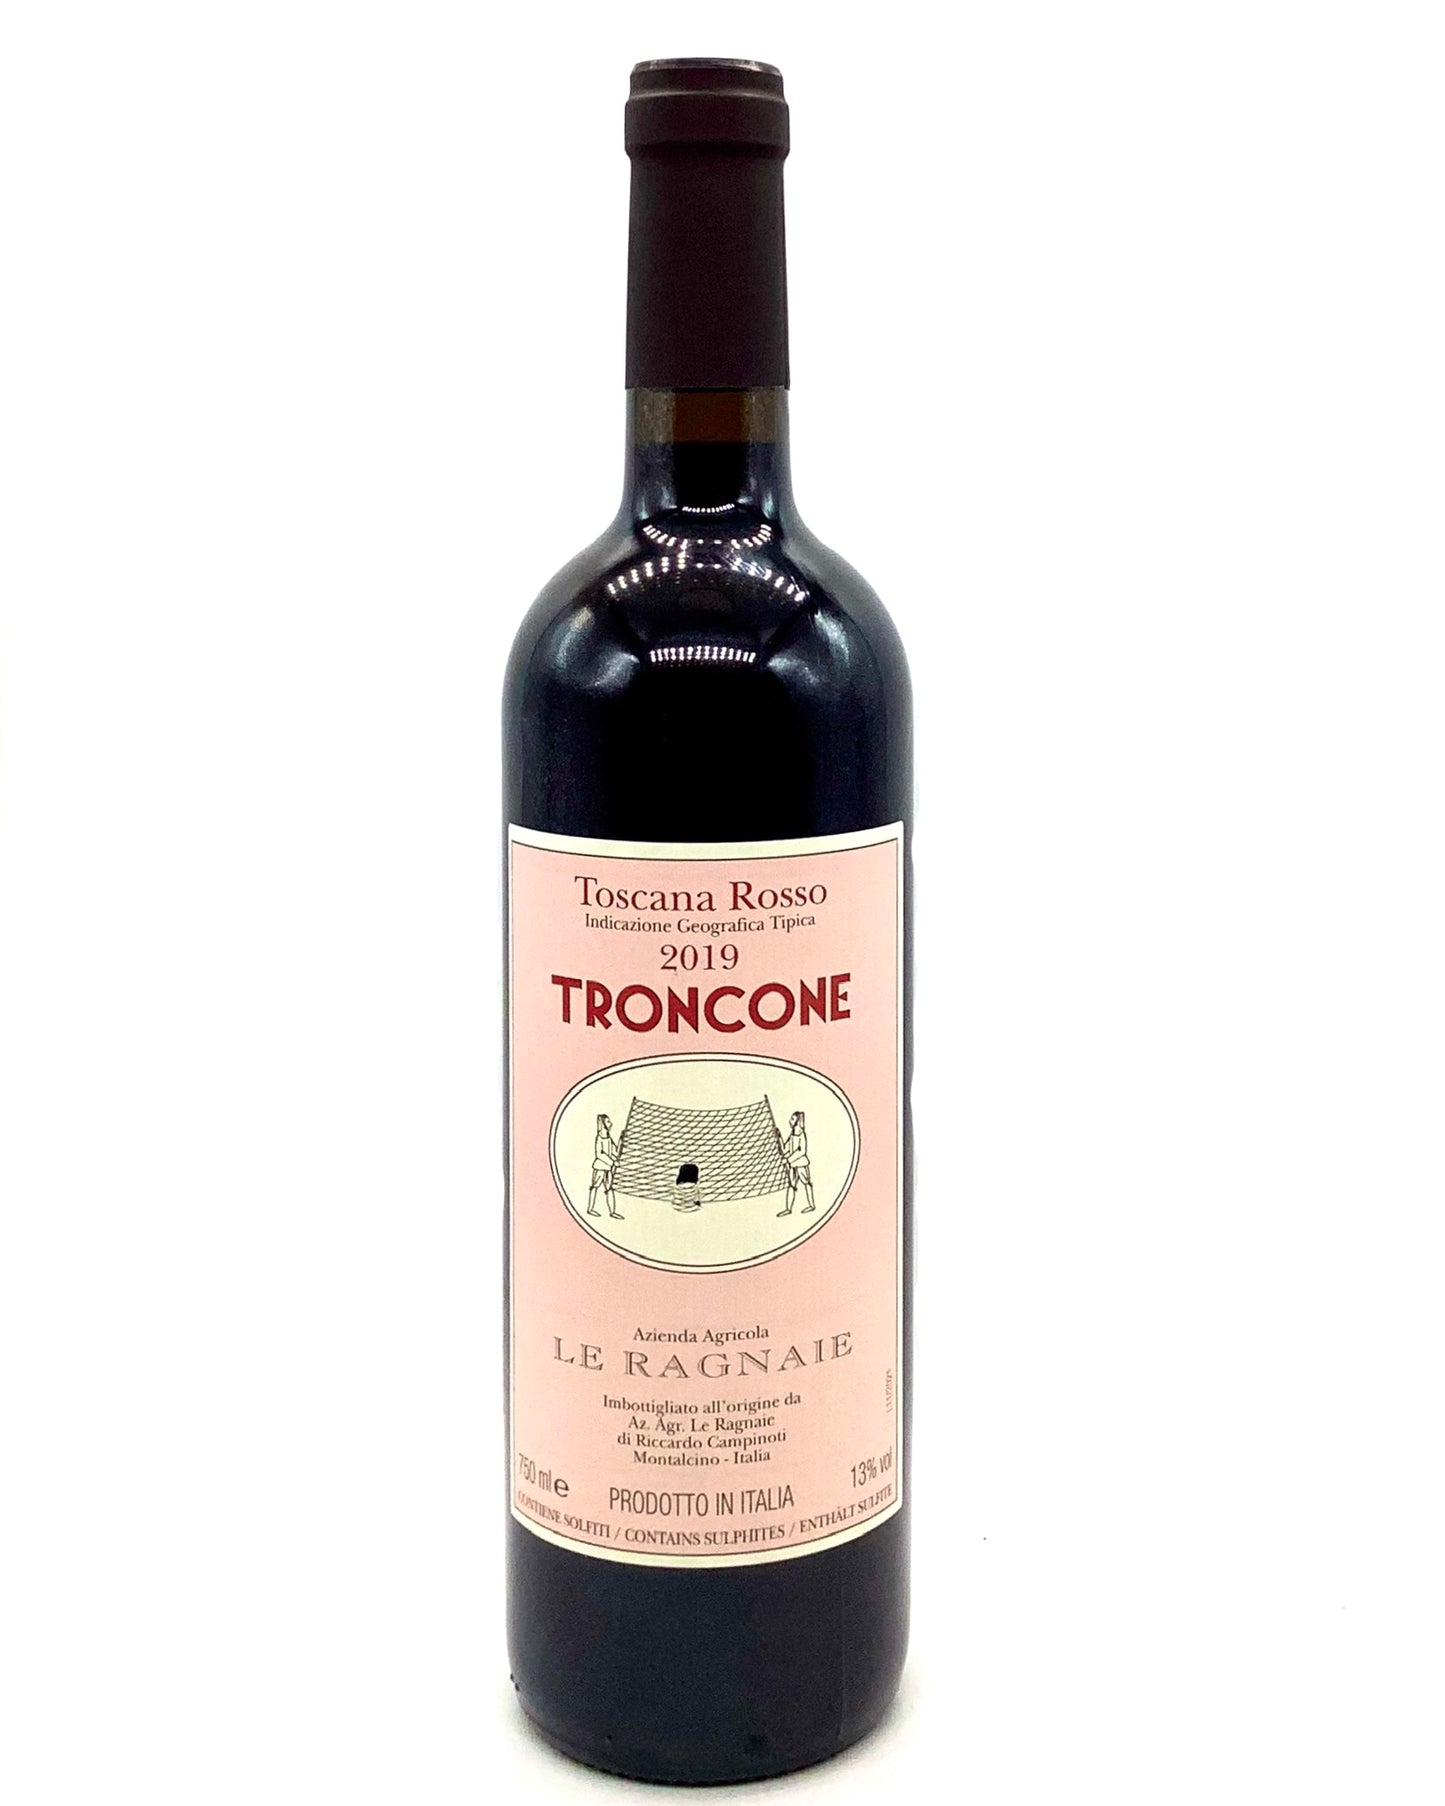 Le Ragnaie, Sangiovese "Troncone" Tuscany, Italy 2020